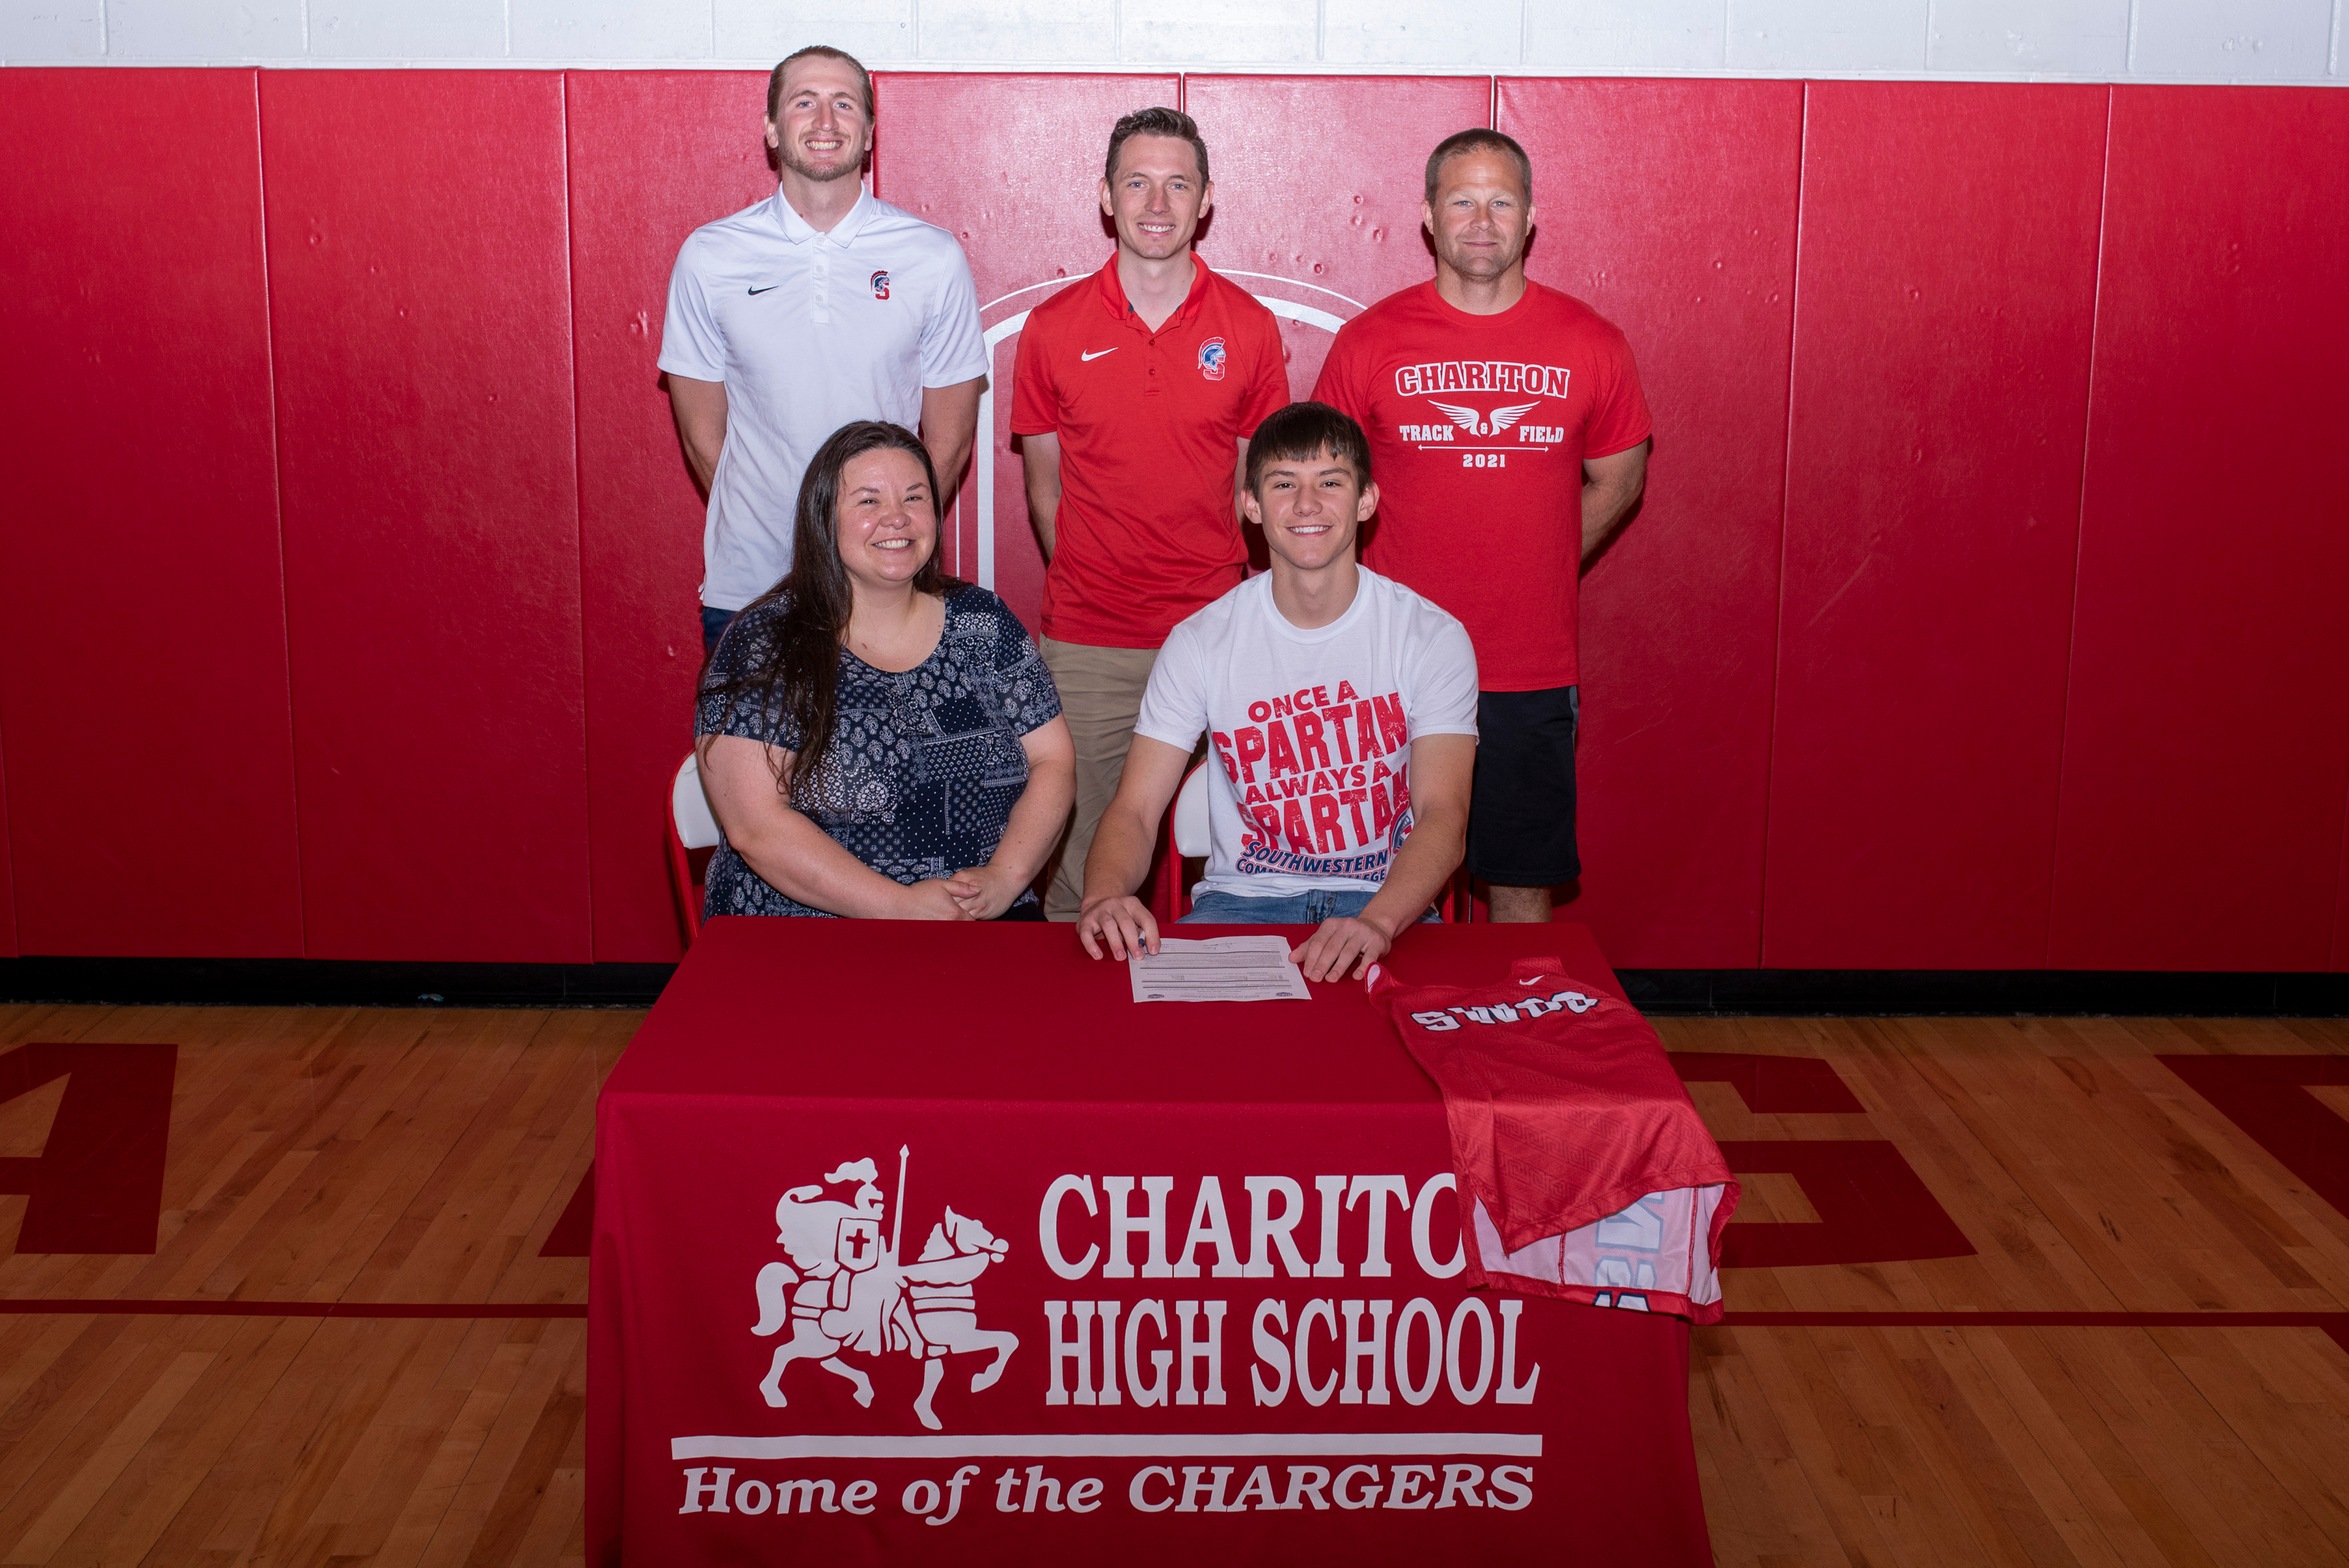 Alex Bates signs his National Letter of Intent to join the Southwestern track and field program. He is joined, in front, by his mother, Abby. Pictured in back, from left, are Southwestern coaches Jackson Shantz and Scott Vicker, and Chariton Track Coach Josh Snook.